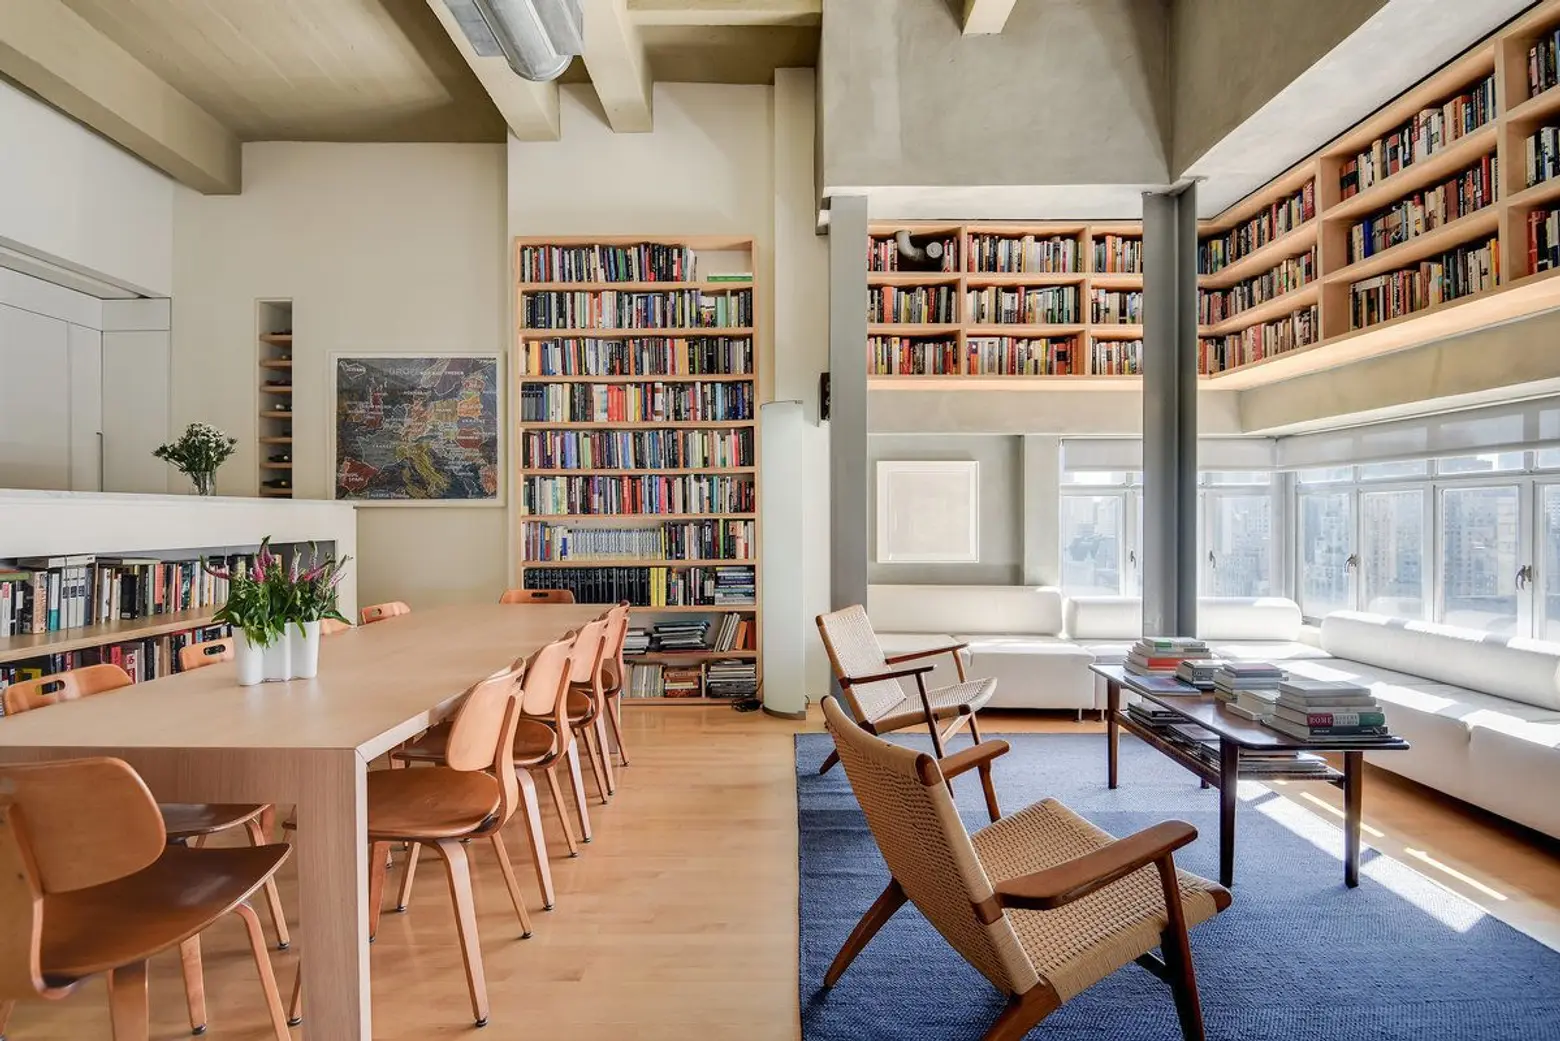 Run your own library from this $5M bookshelf-lined Central Park West loft